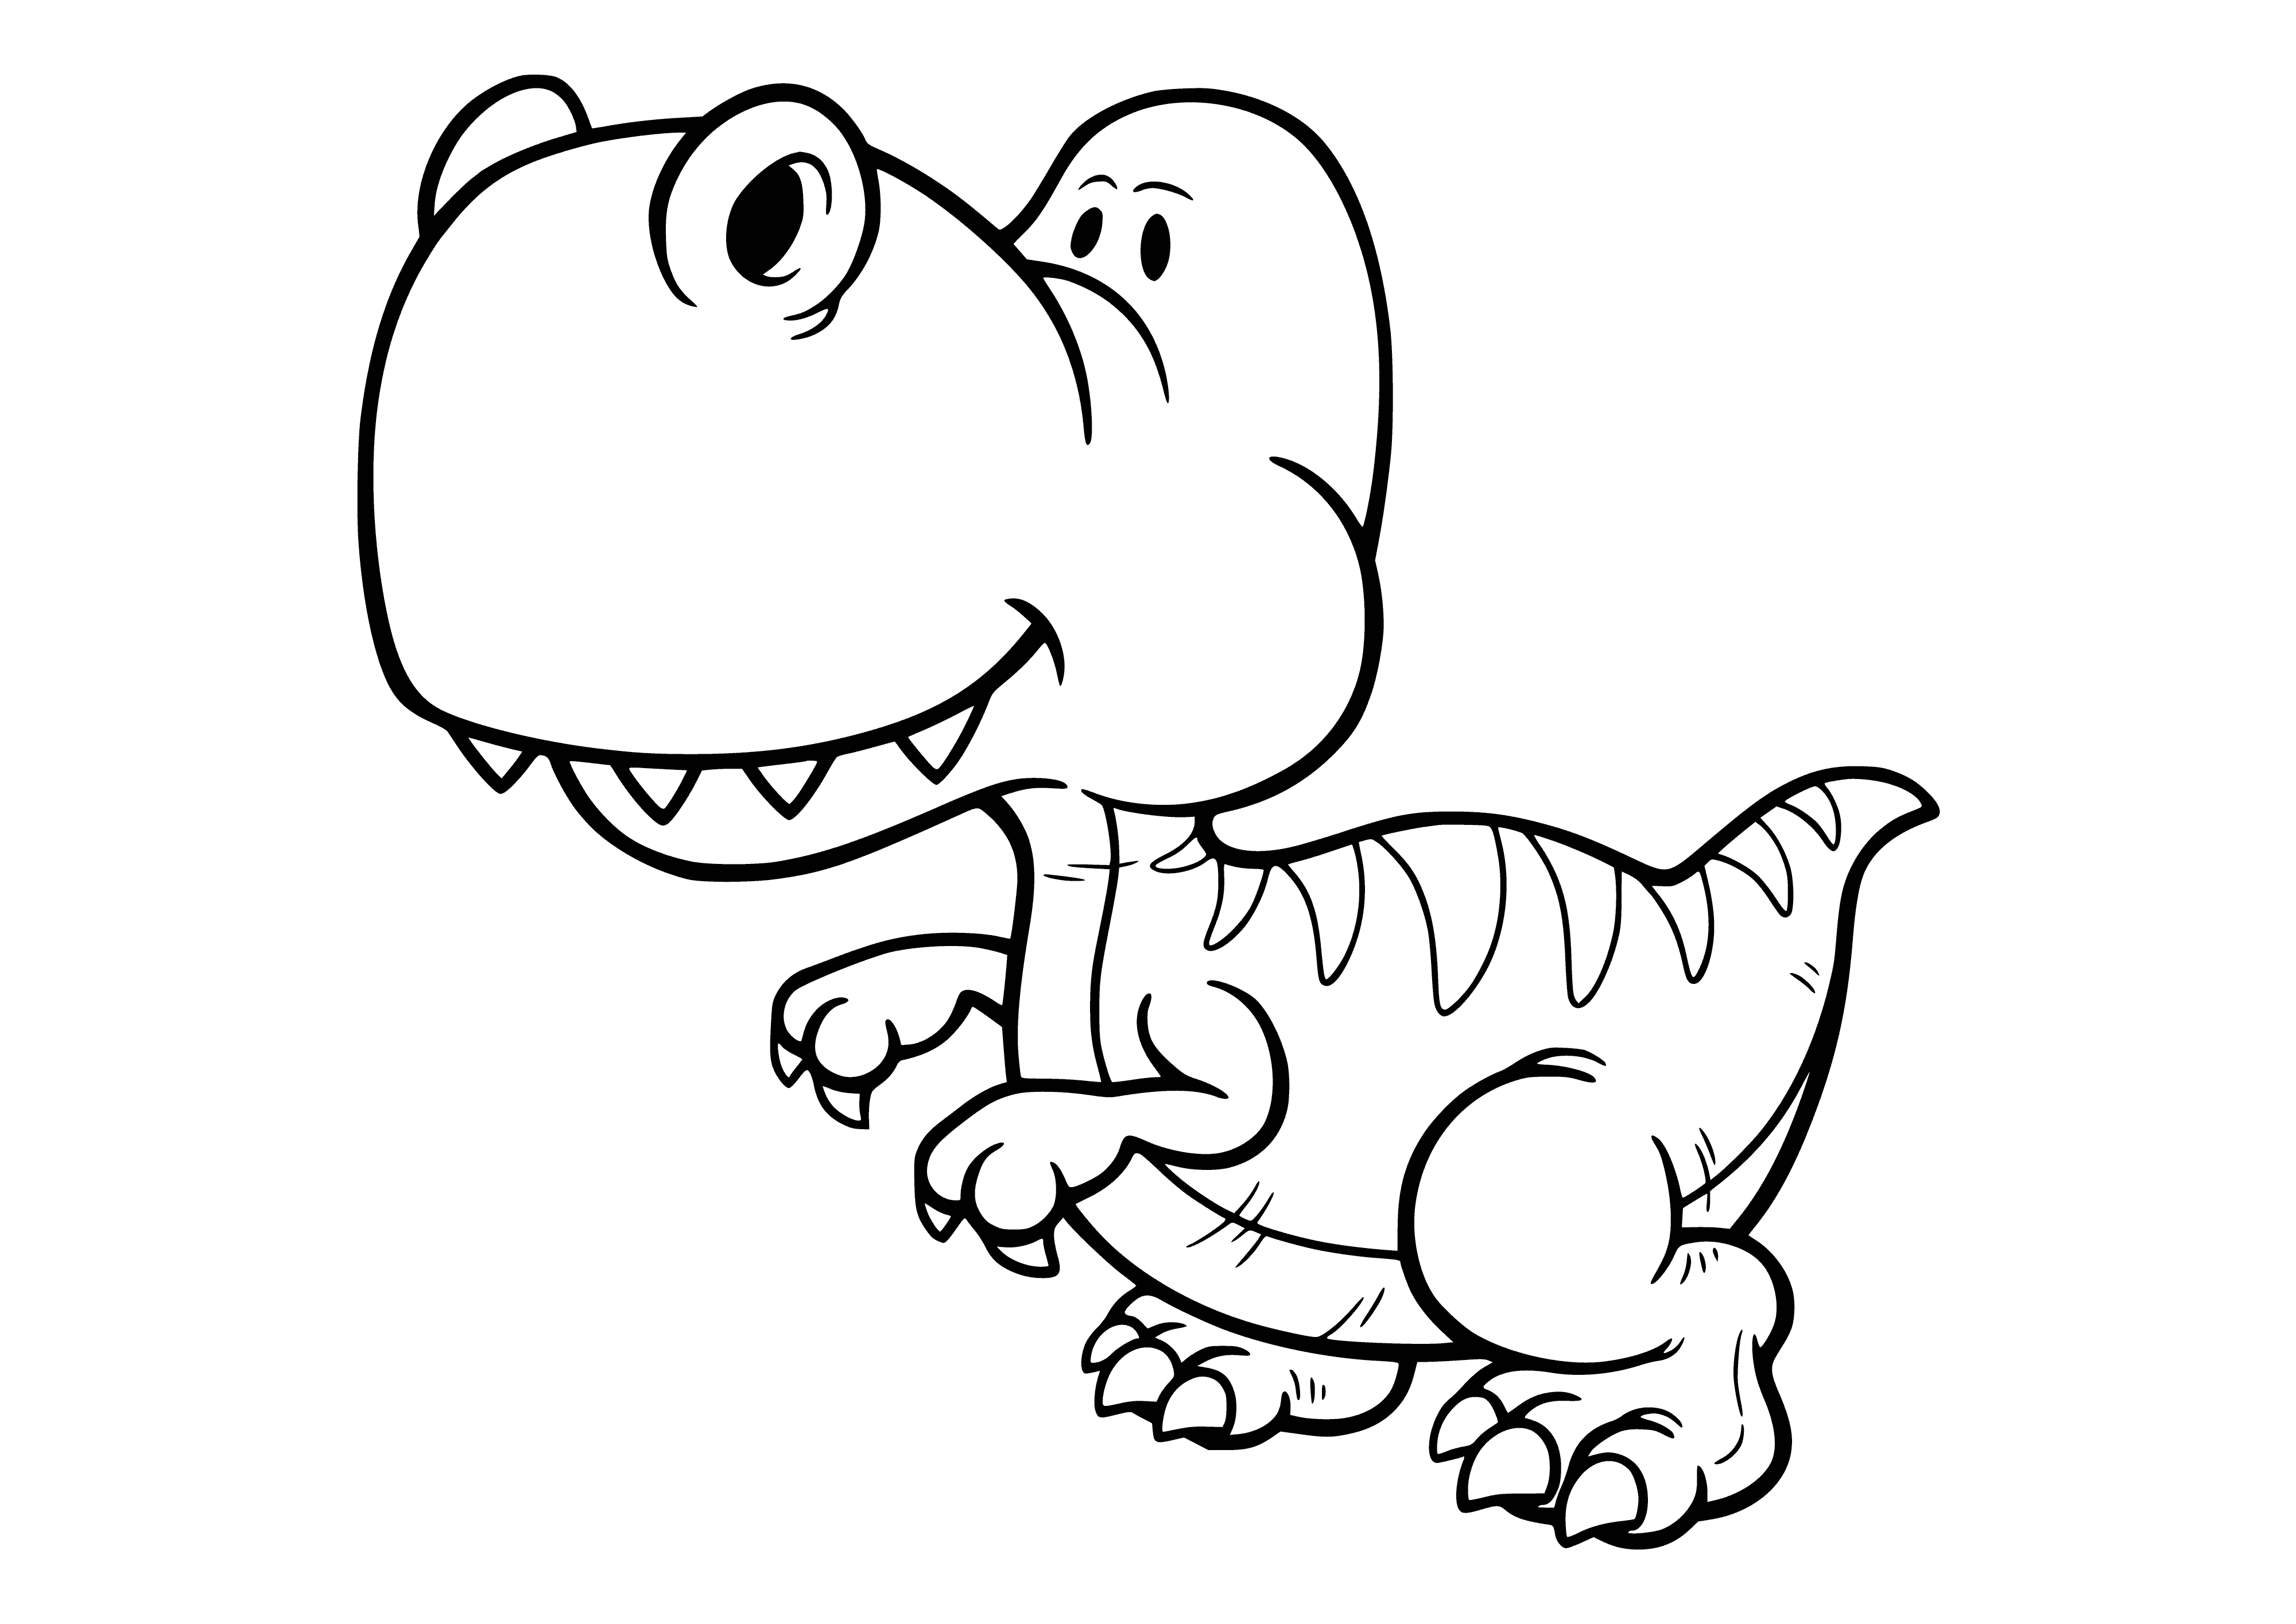 coloring page: A small, brown dinosaur with long tail, small pointy wings, skinny legs and sharp claws has red stripes on its back.